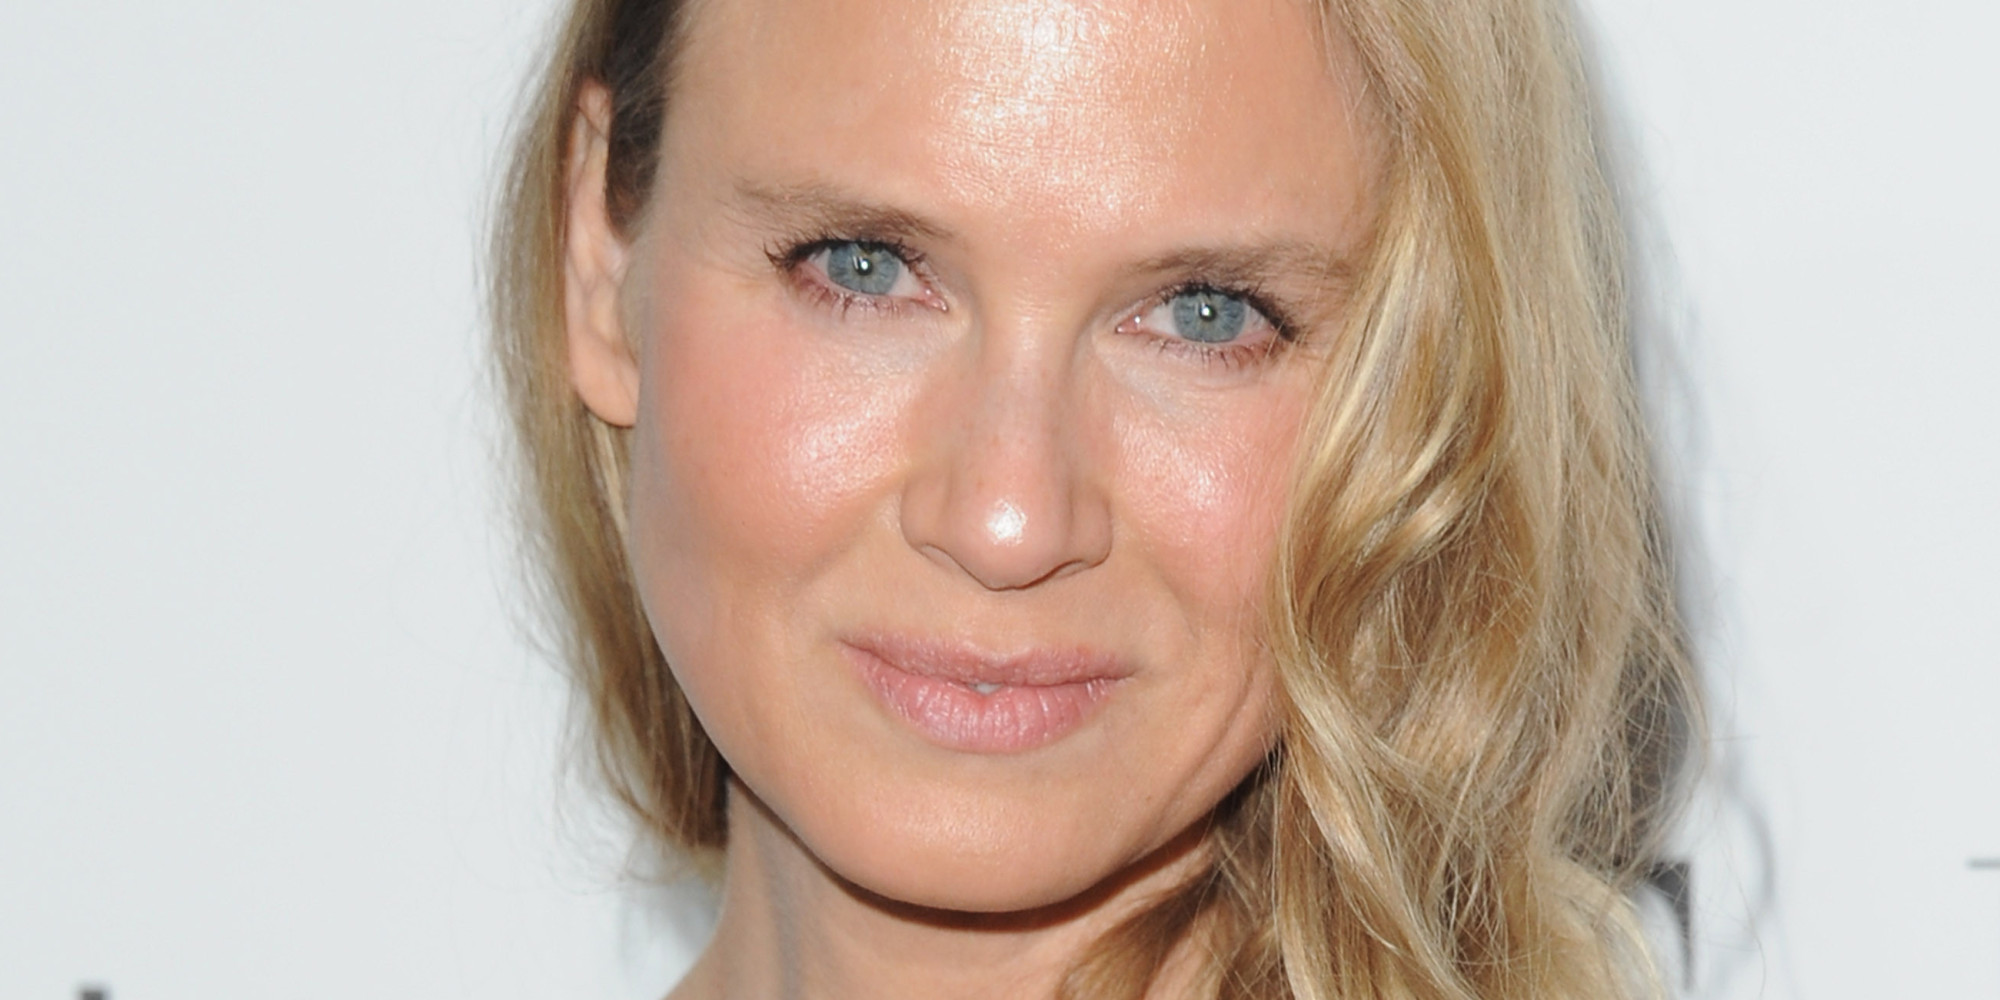 Renee Zellweger Speaks Out: 'I'm Glad Folks Think I Look Different' | HuffPost